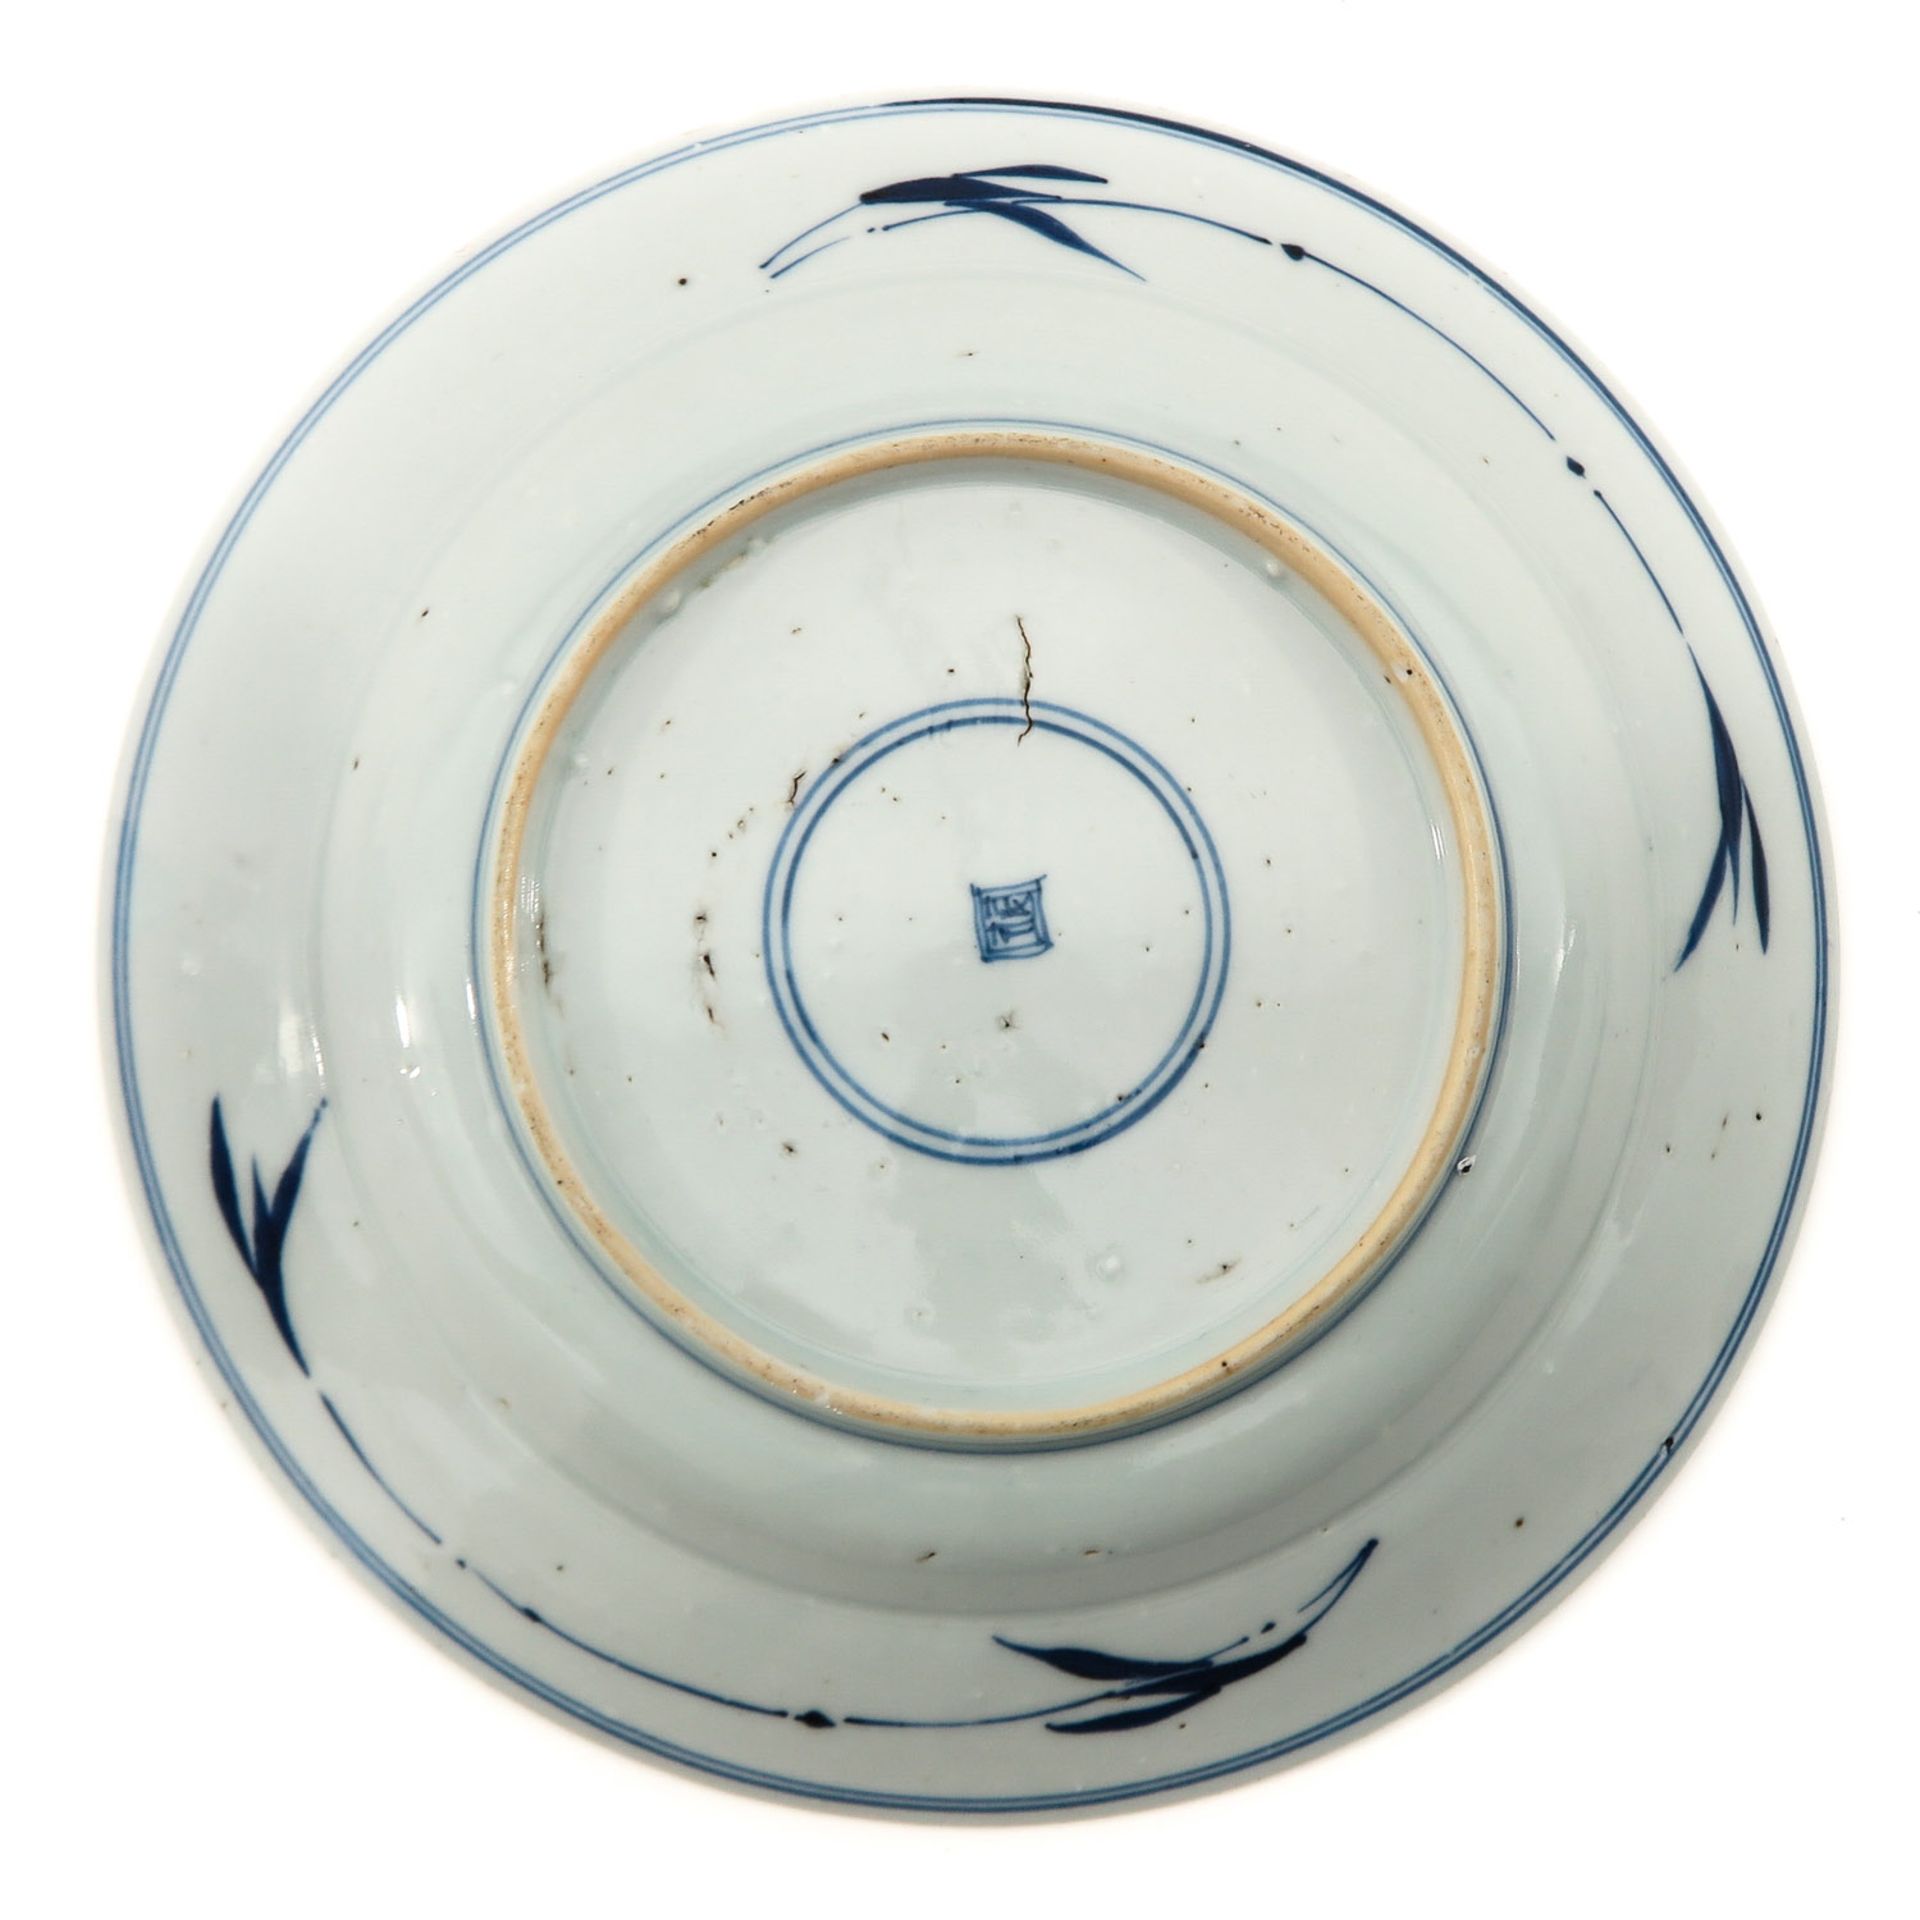 A Pair of Blue and White Plates - Image 4 of 10